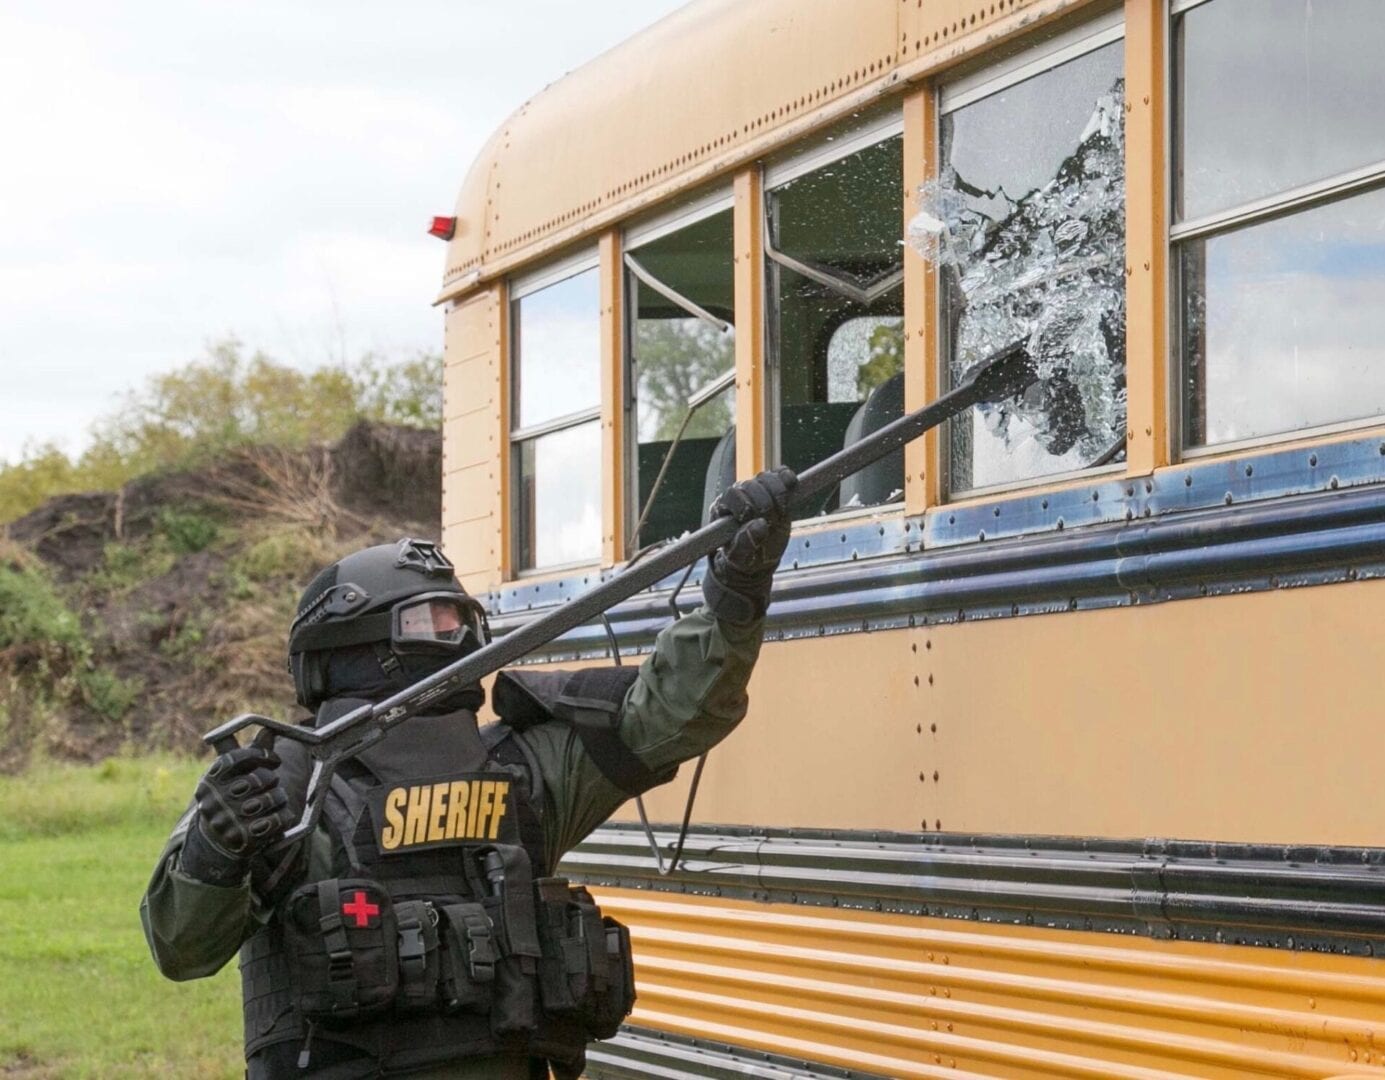 A police officer spraying a school bus with a hose.